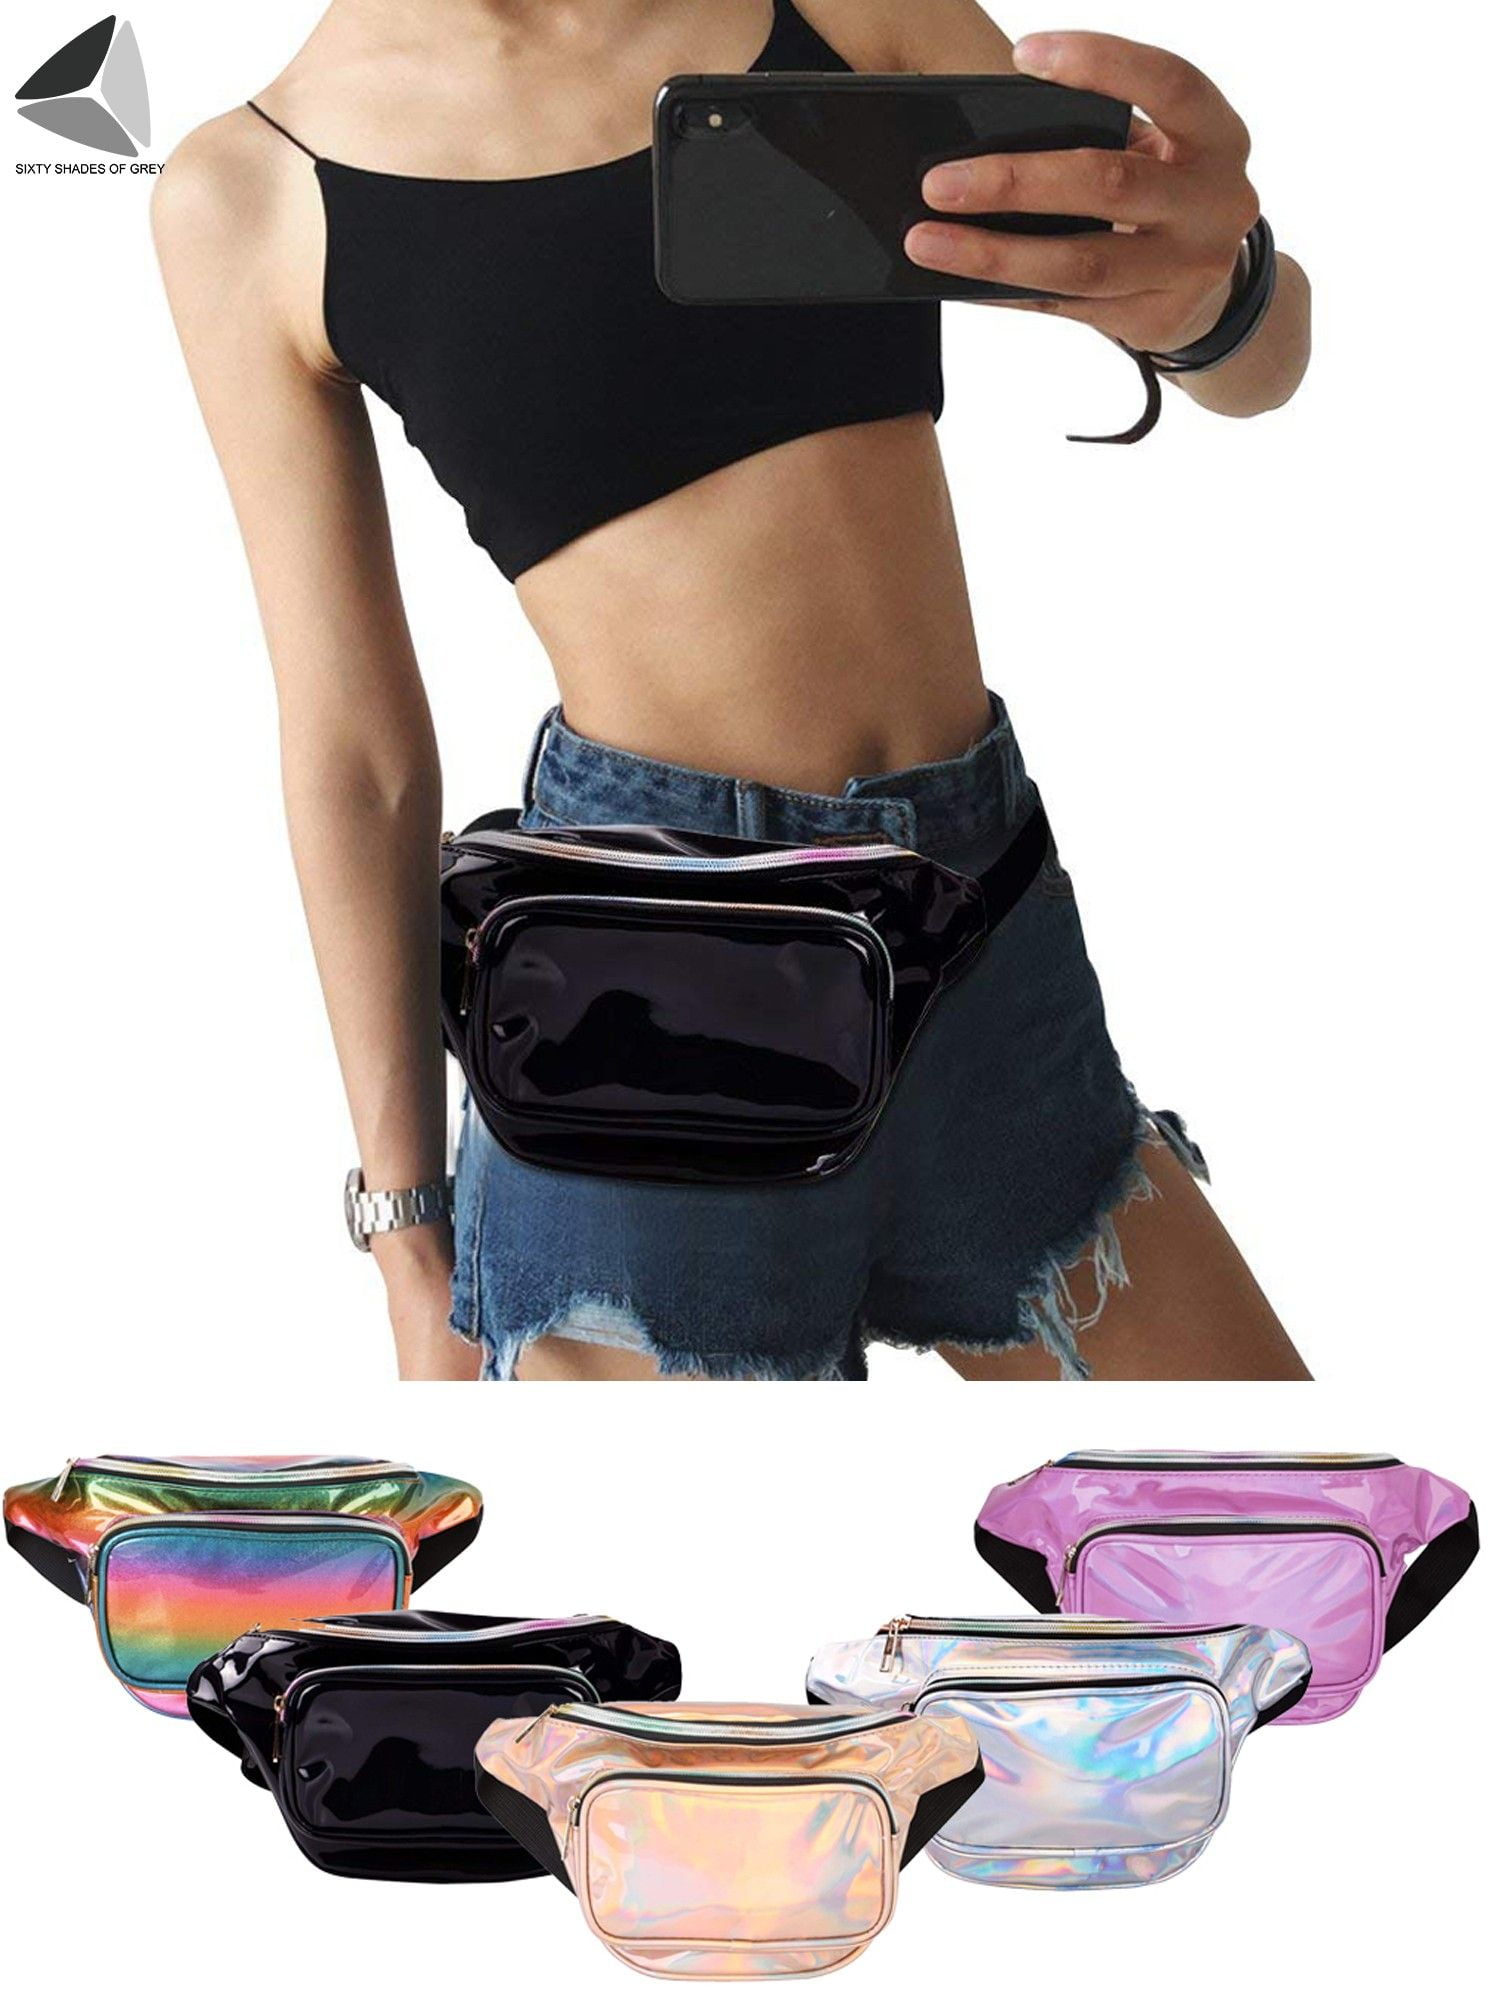 Aonijie Water Resistant Fanny Pack for Man Women carrying Iphone 8 plus XS Max 